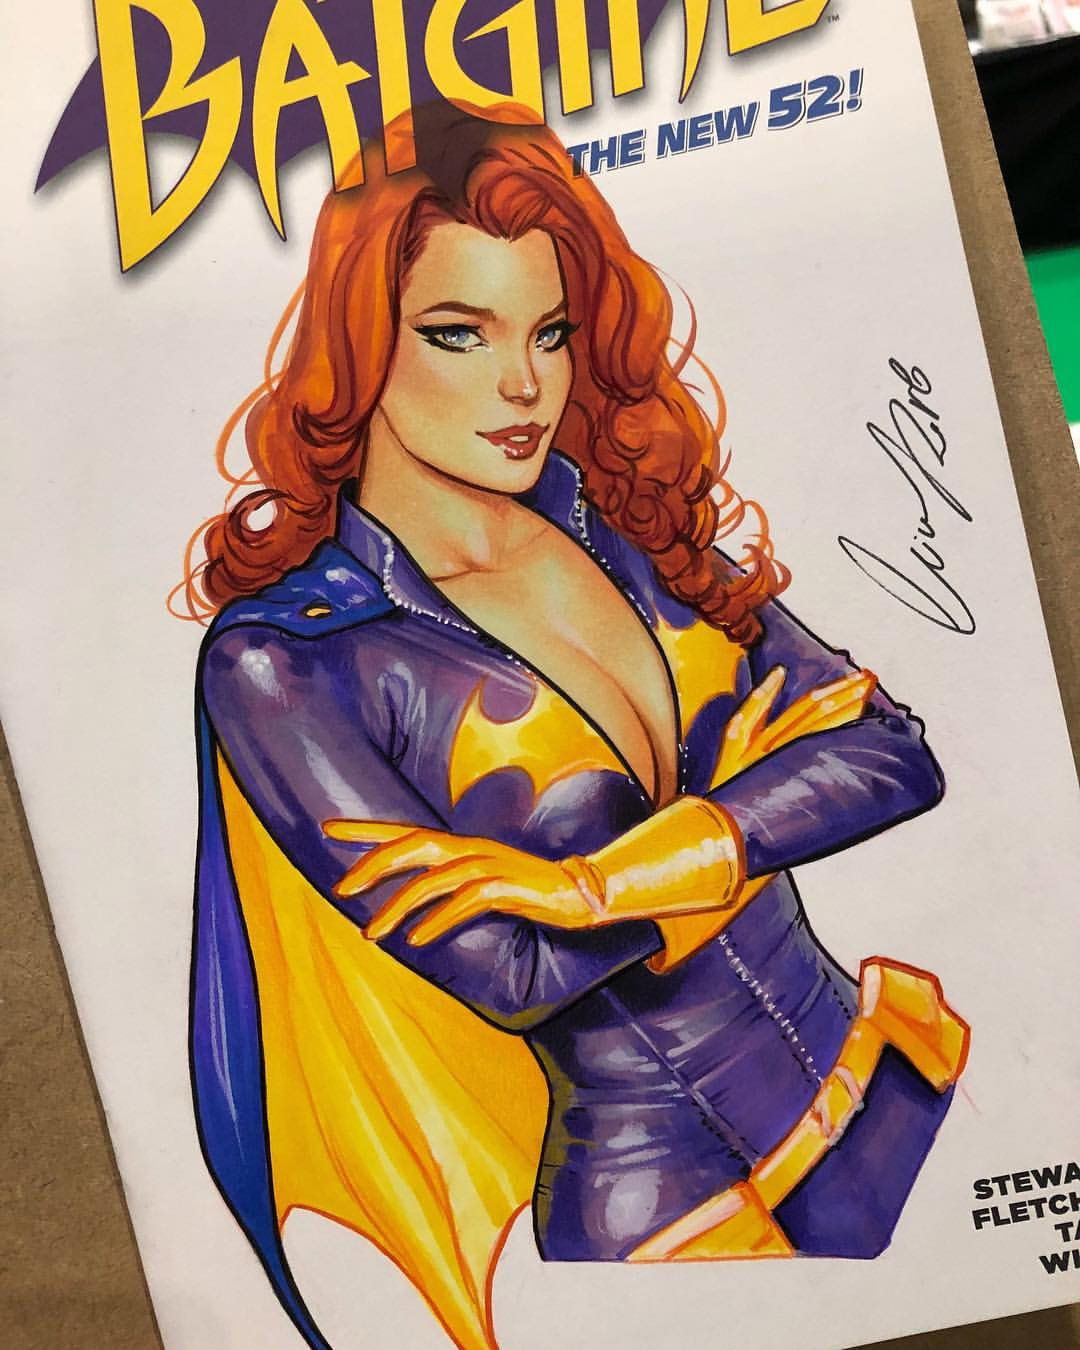 Photo by Justanotherguy with the username @Justanotherguy79,  October 29, 2018 at 11:38 AM and the text says 'eliaschatzoudis:#batgirl @mcmcomiccon #mcmlondoncomiccon #eliaschatzoudis #copicmarker #fabercastell #art #artist #comicart #comiccon #design #originalart #elias #copic #coverart #cover #commission #illustration #pencil #pen #ink #colorpencil  (at ExCeL..'